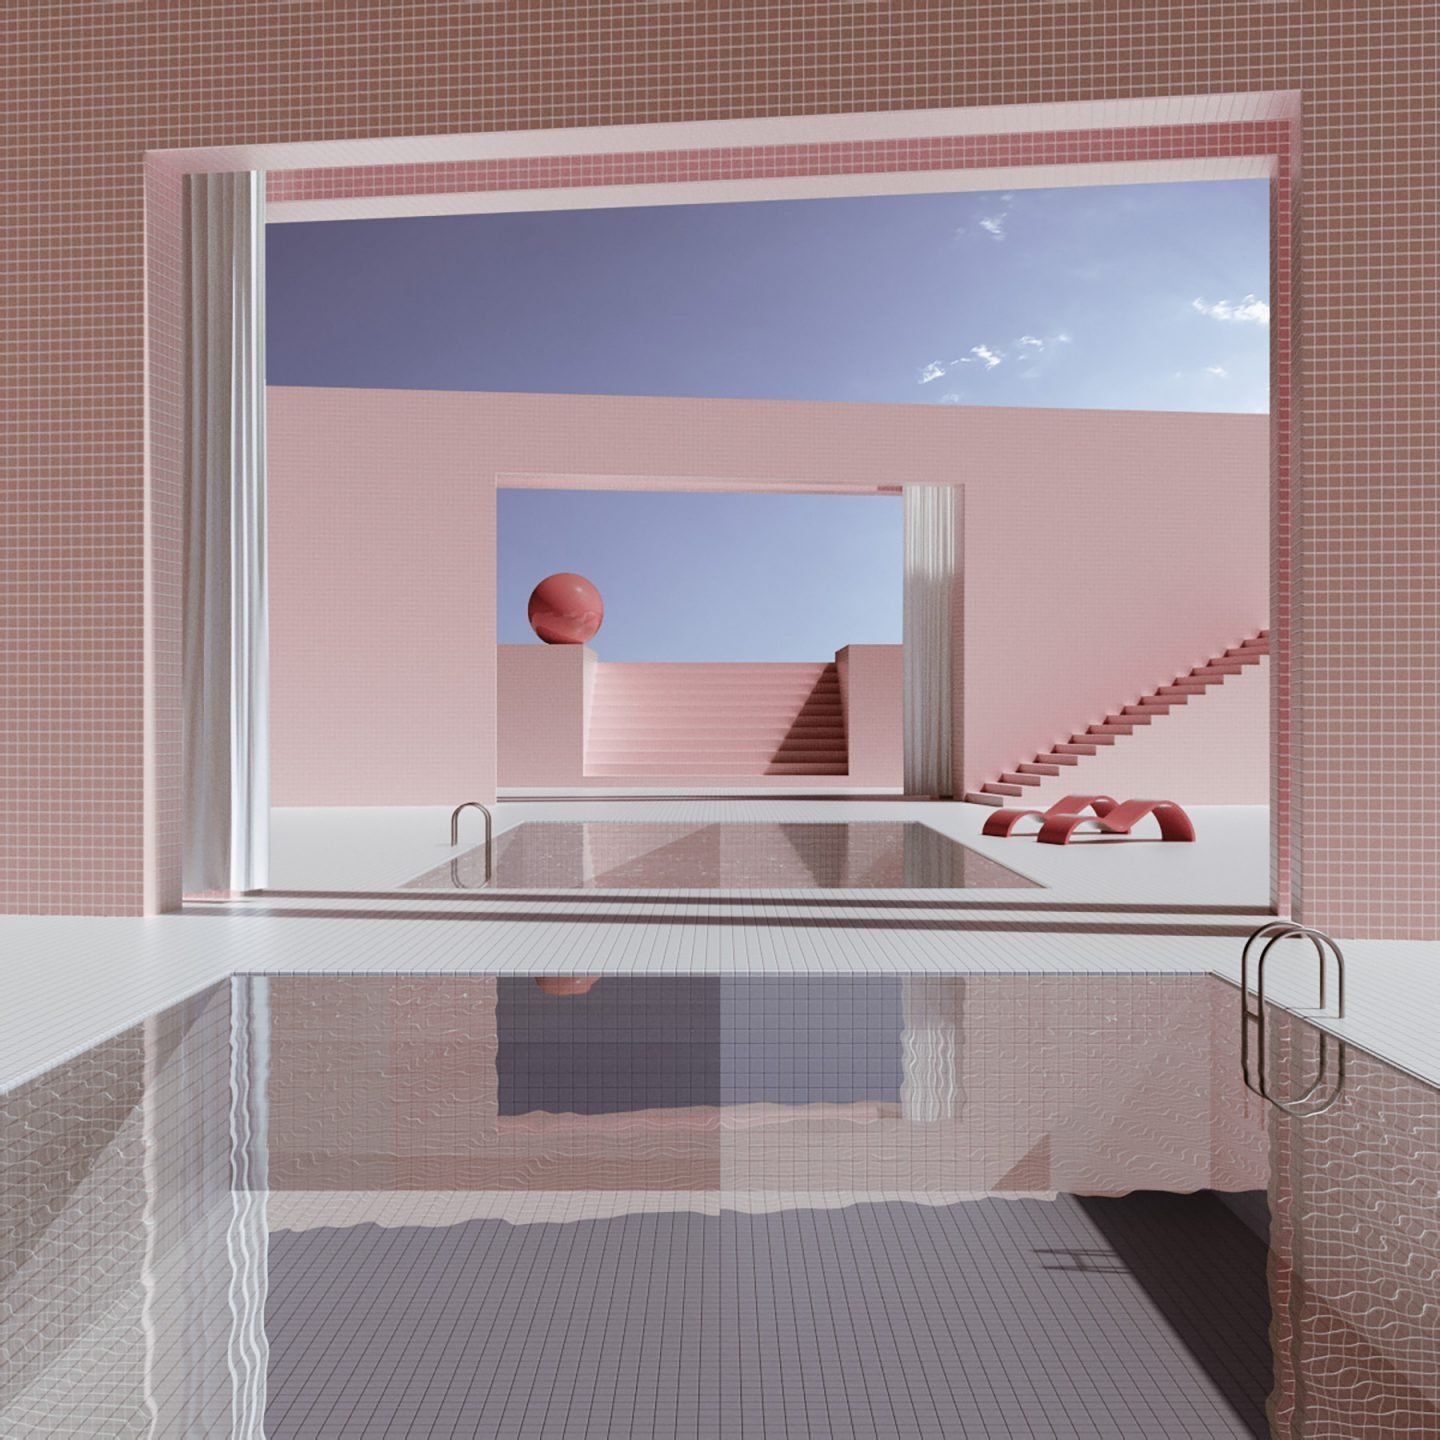 General 1440x1440 water sky clouds tiles pink CGI white stairs liminal surreal